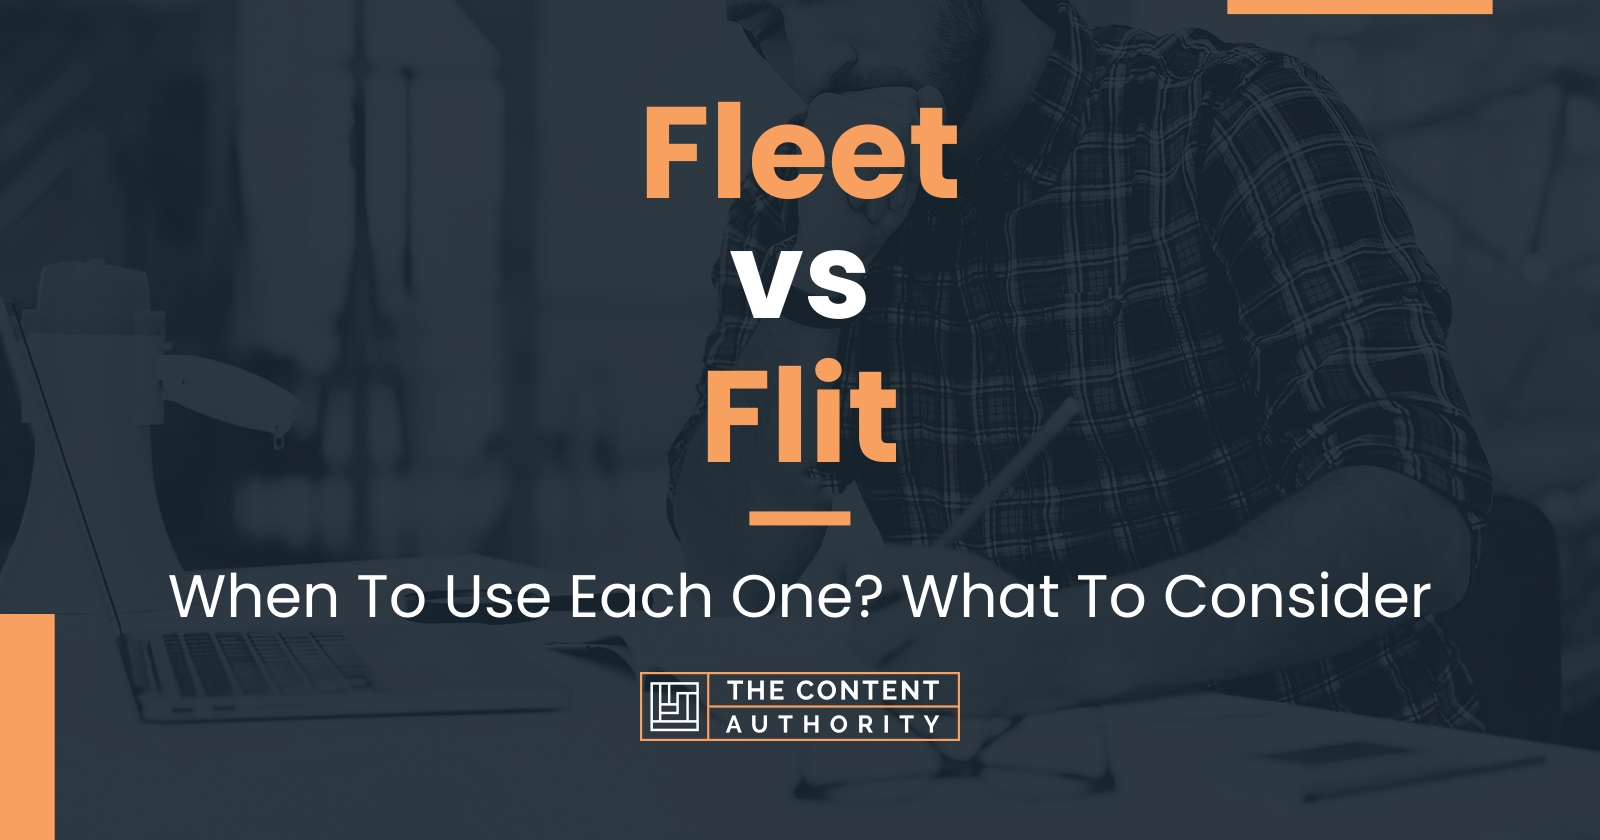 Fleet vs Flit: When To Use Each One? What To Consider